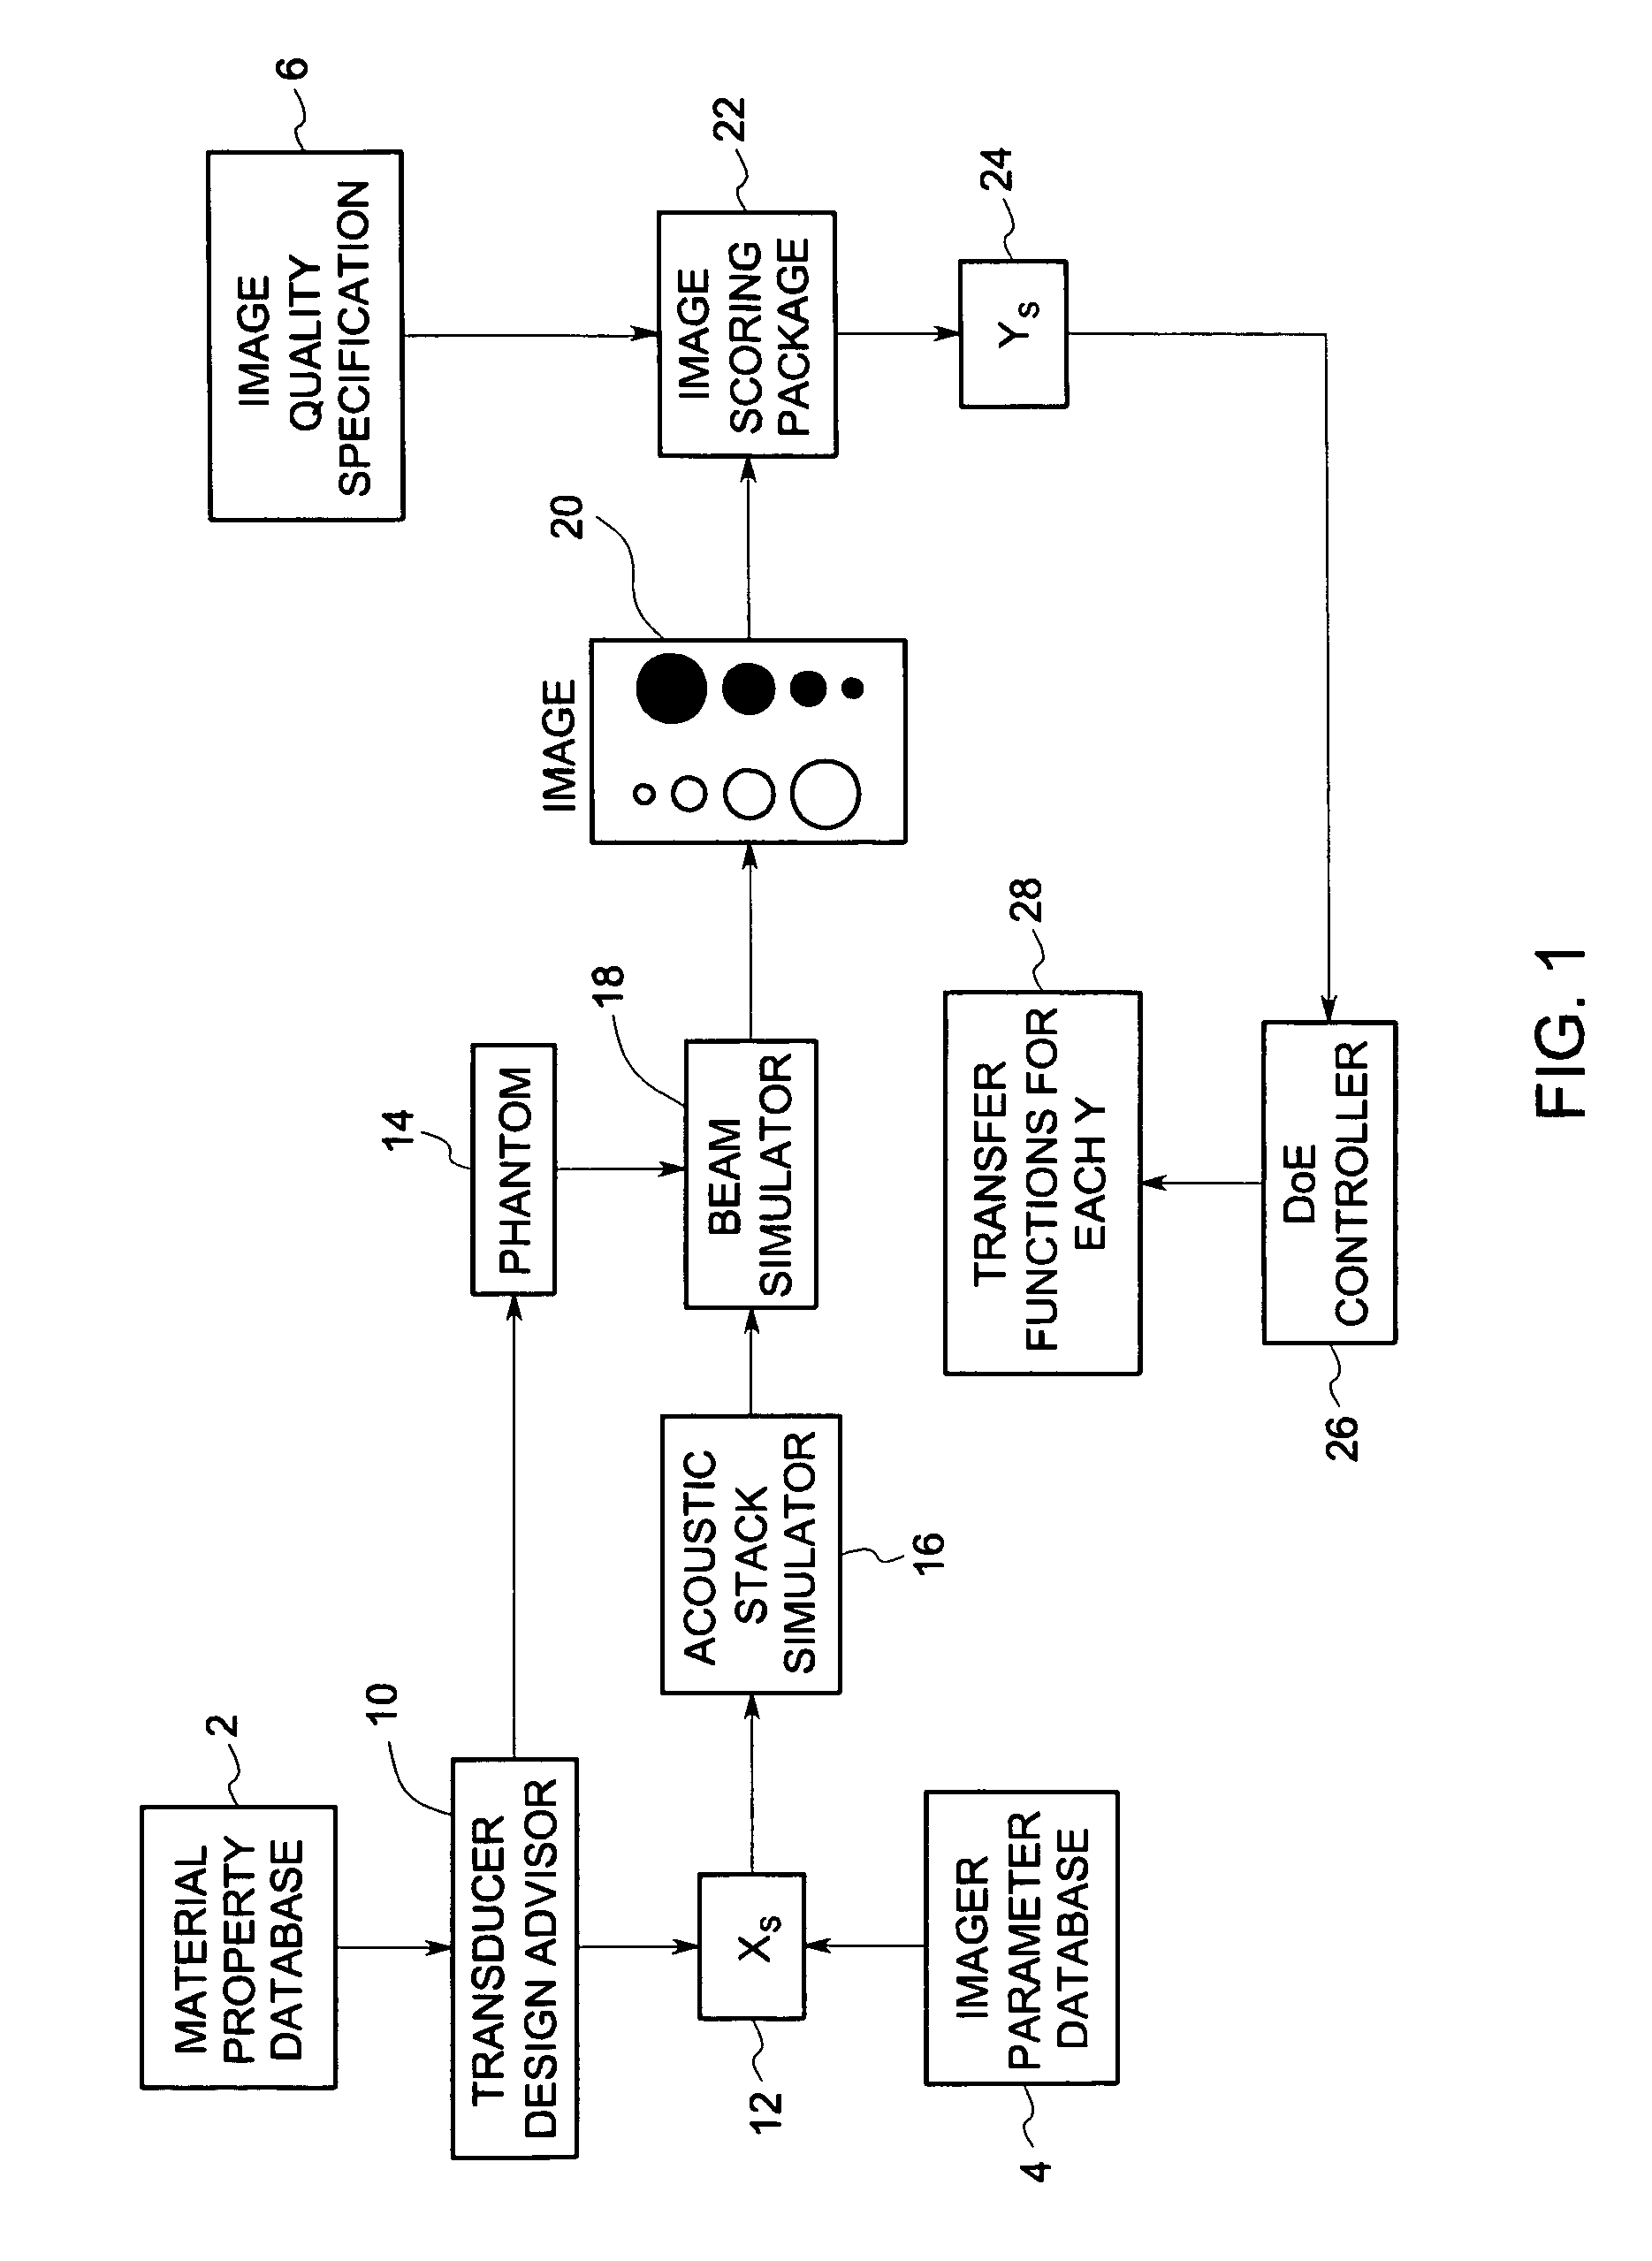 System and method for statistical design of ultrasound probe and imaging system